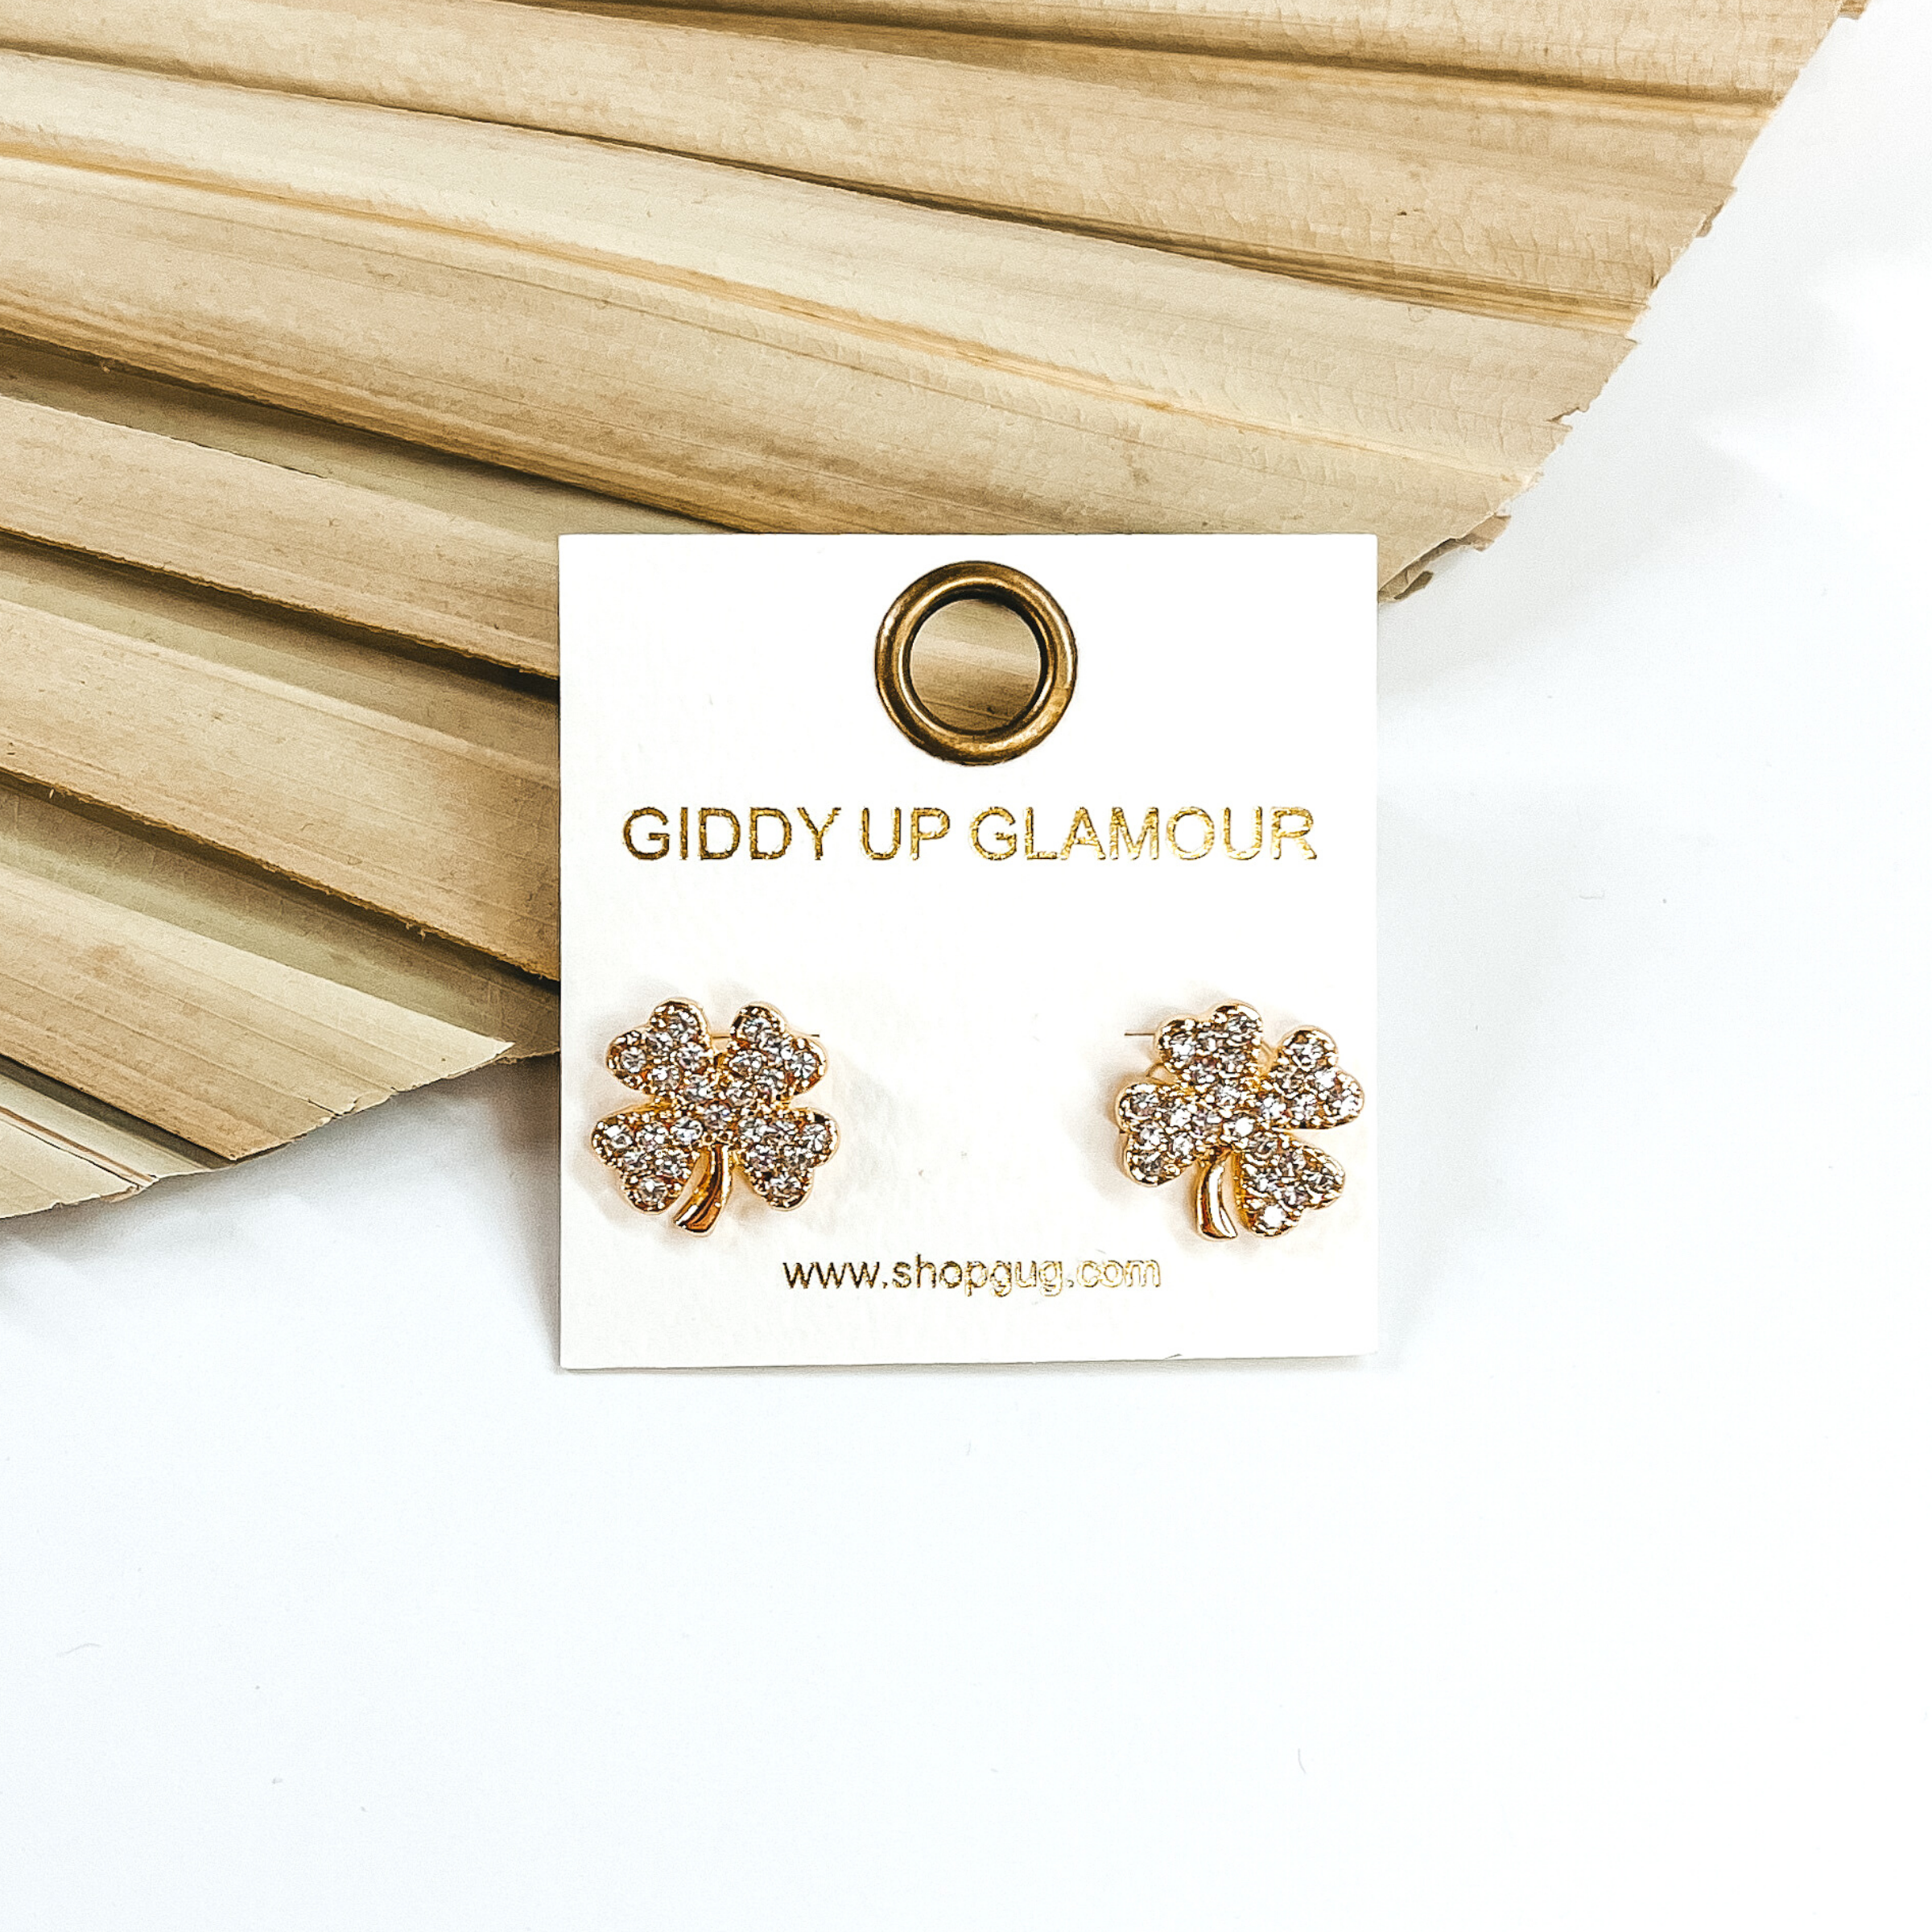 Gold four leaf clover stud earrings that are covered in clear crystals. These studs are pictured in front of a dried leaf on a white background.